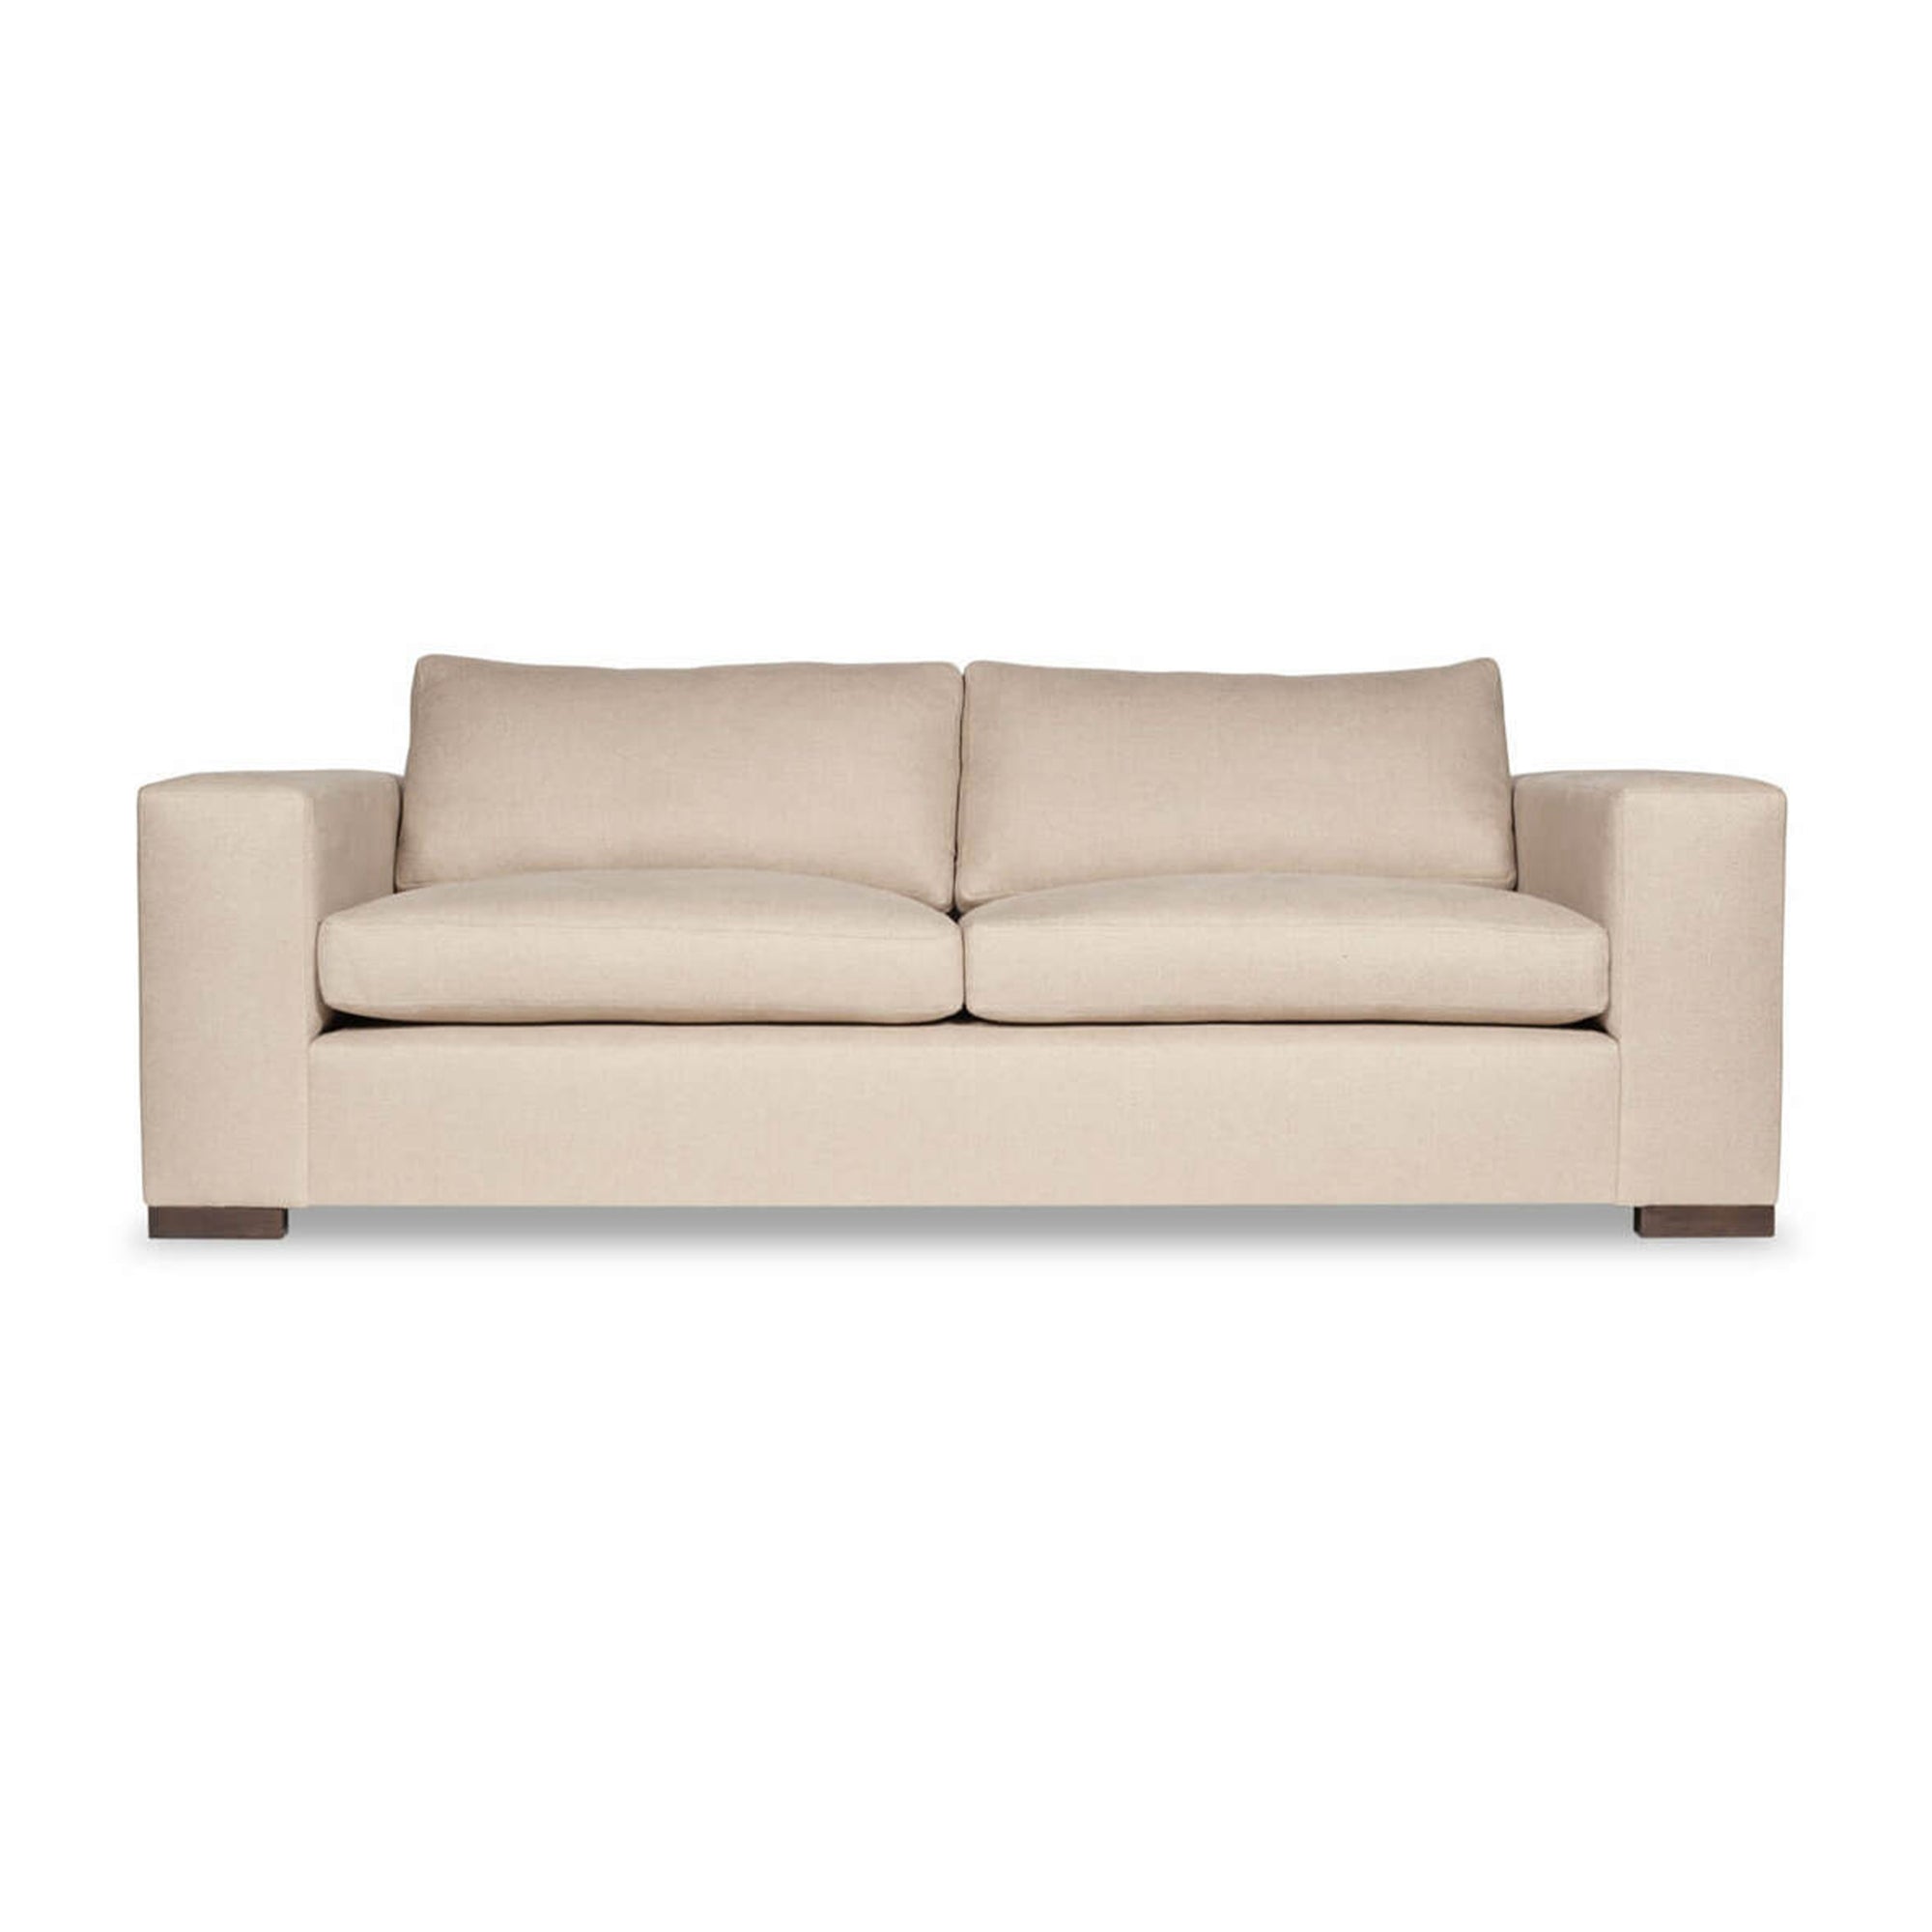 HOV Loveseat by Moss Home